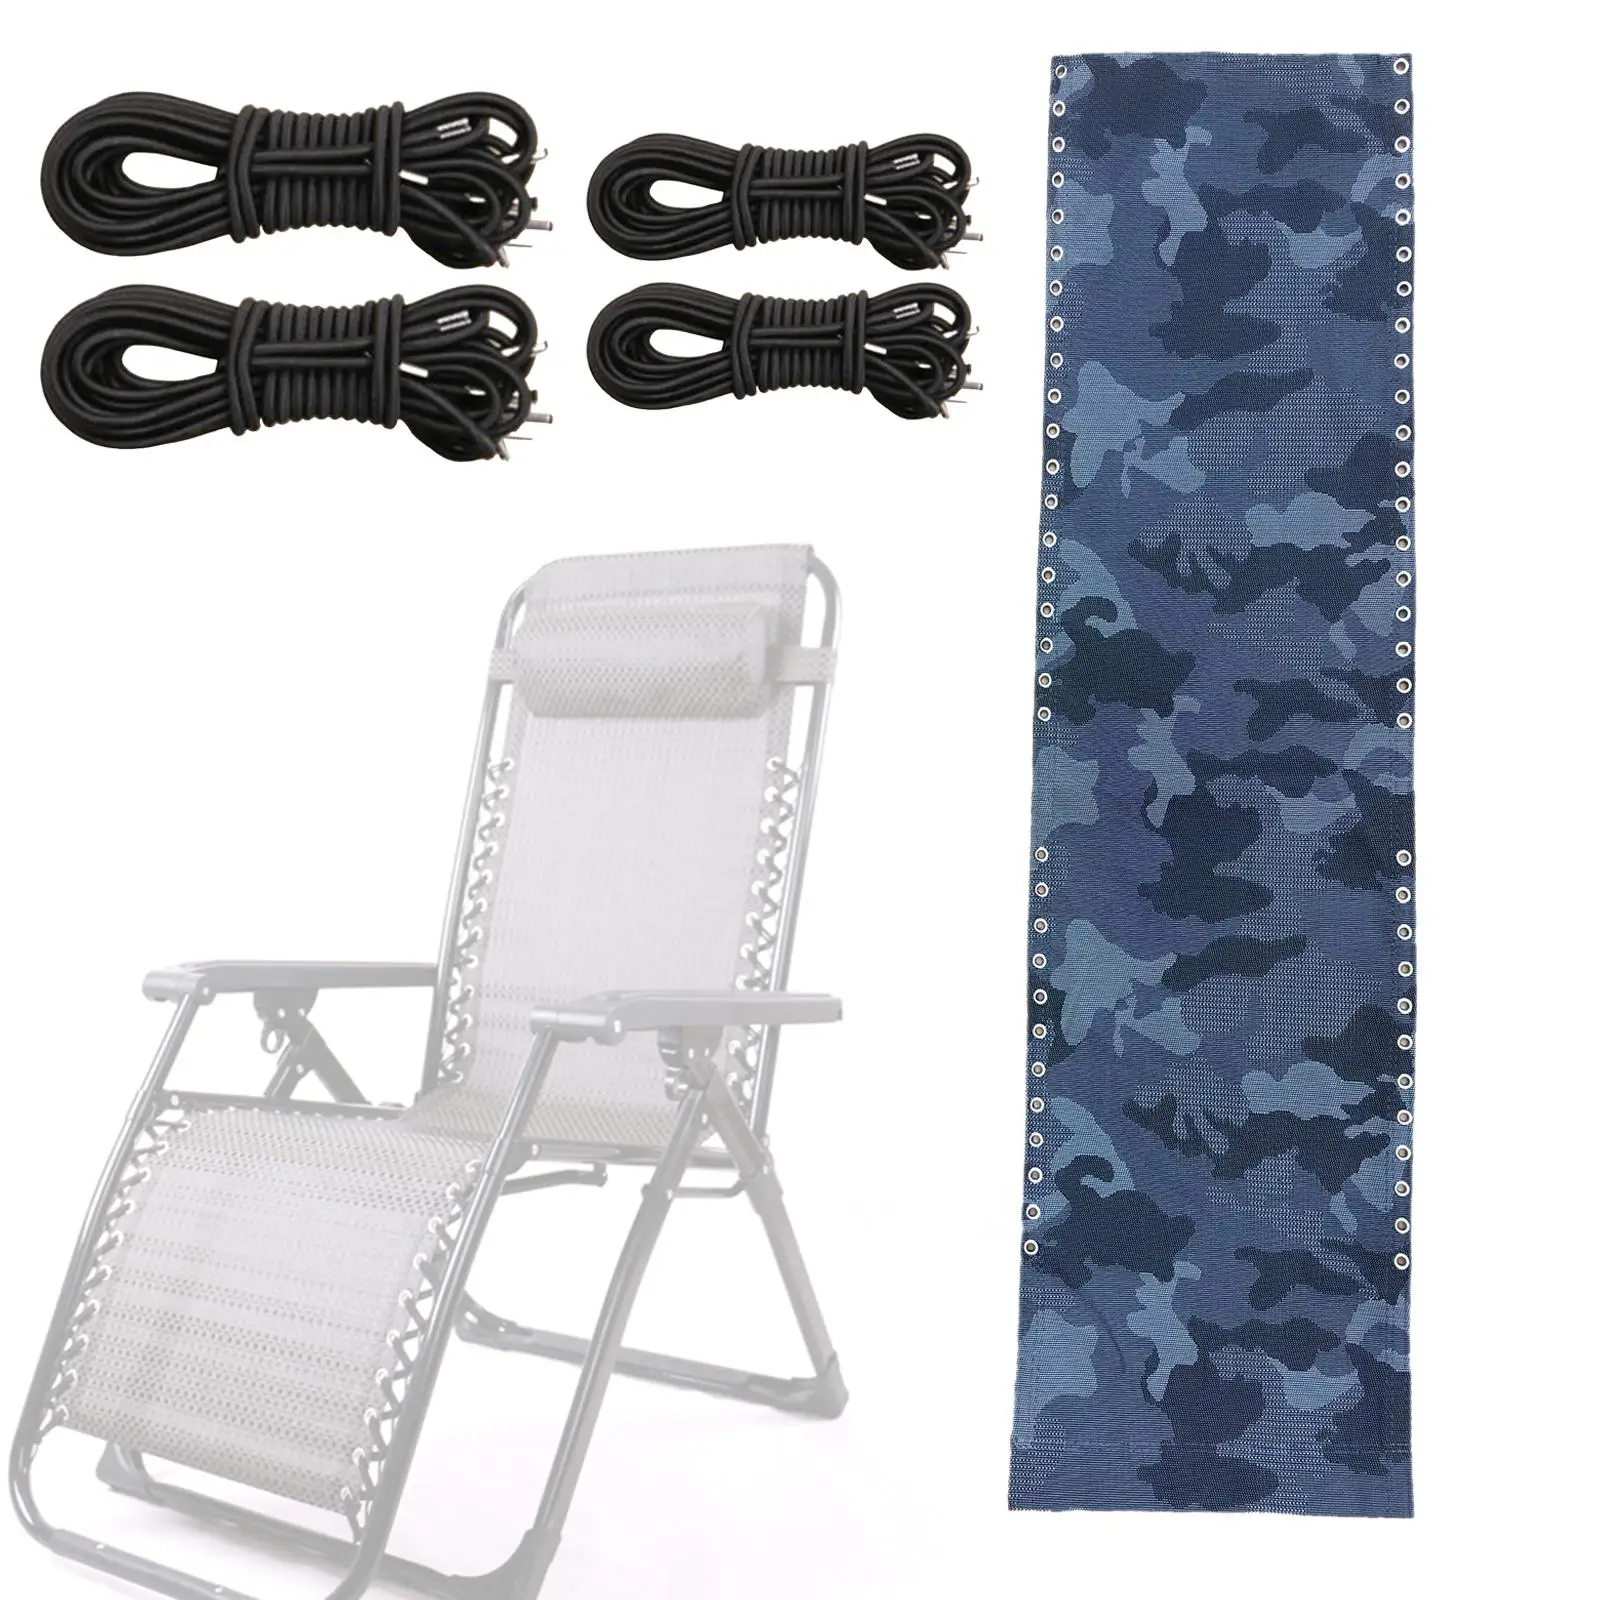 Heat Resistant recliner Replacement Fabric Toolfor Waterproof Folding Chair Cover for Back Yard Camping Lounge Beach Outdoor